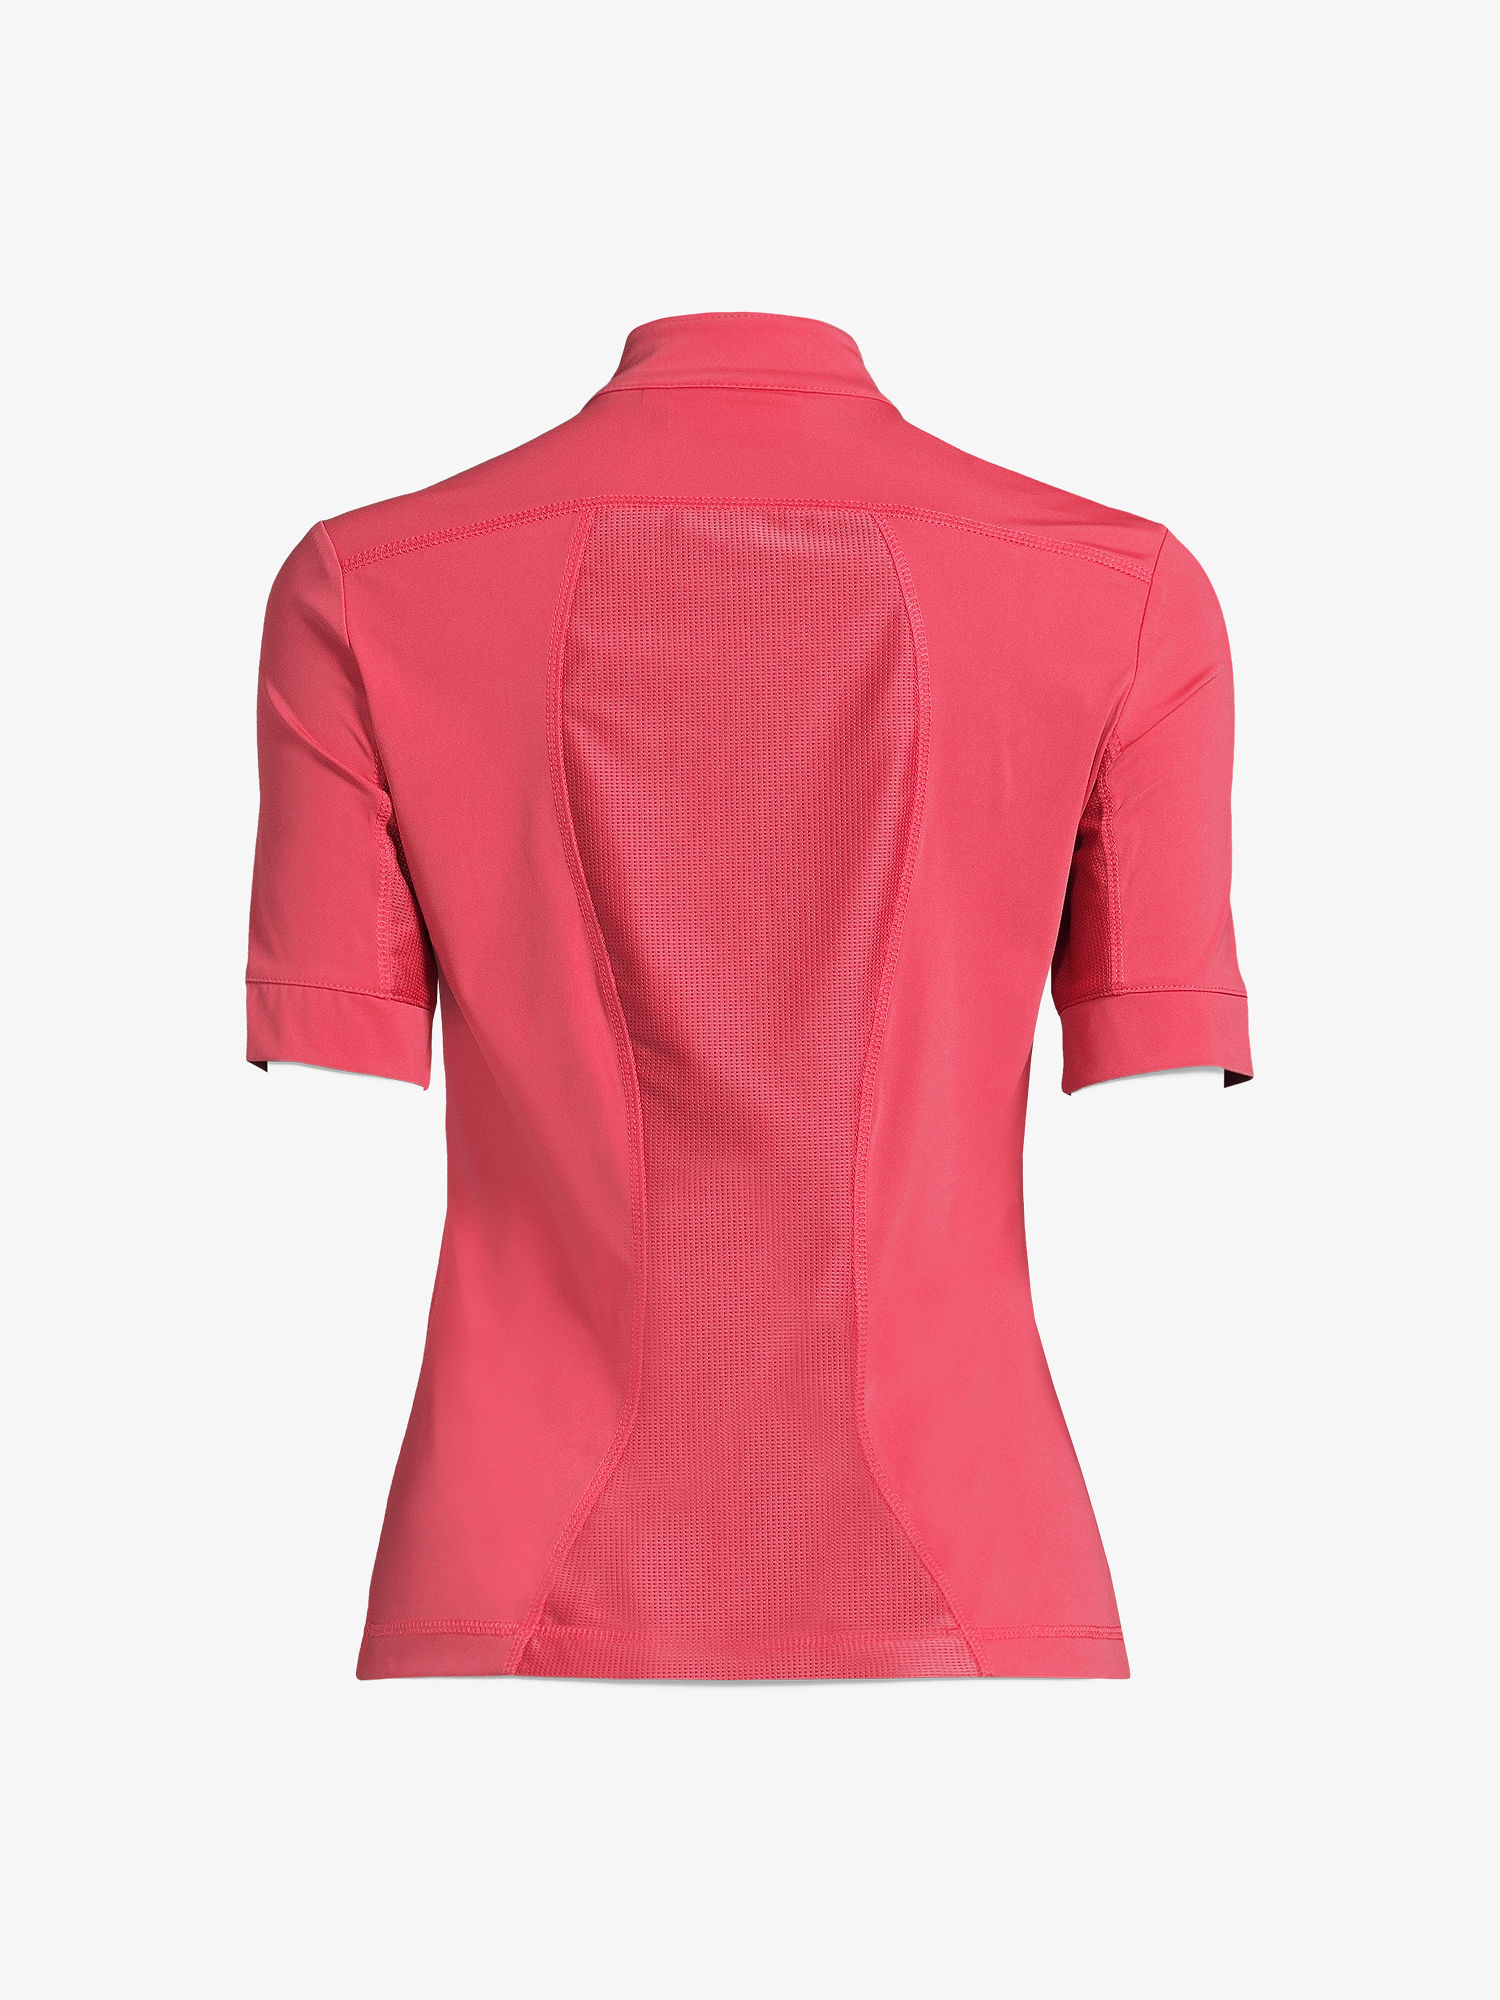 Top Official Sleeve PS Base • Sweden Cecile PS Webshop | | of Short Functional